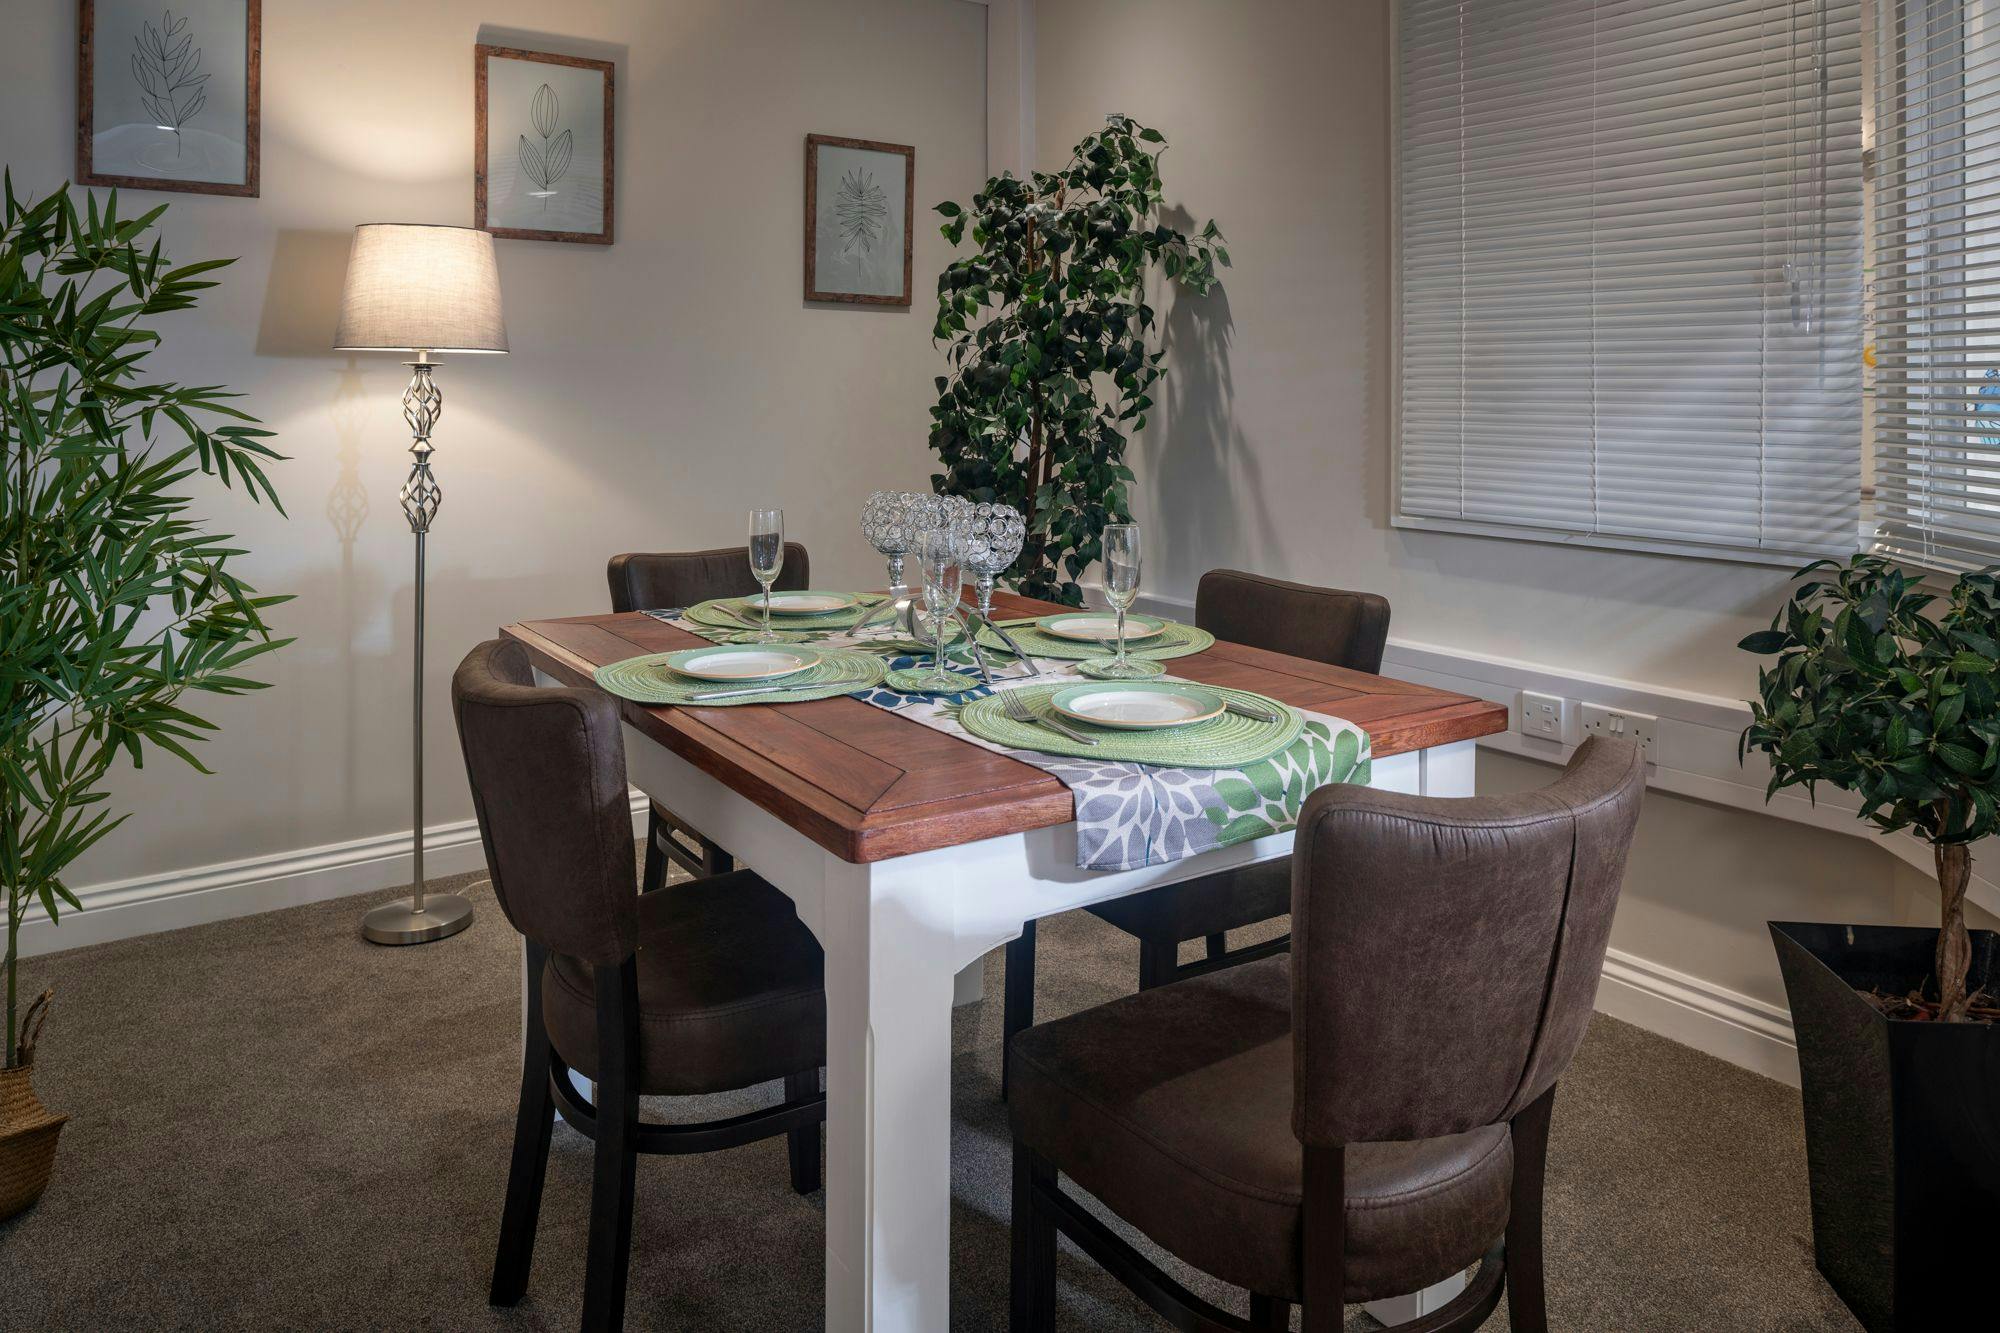 Dining Area at Goodson Lodge in Care Home in Trowbridge, Wiltshire